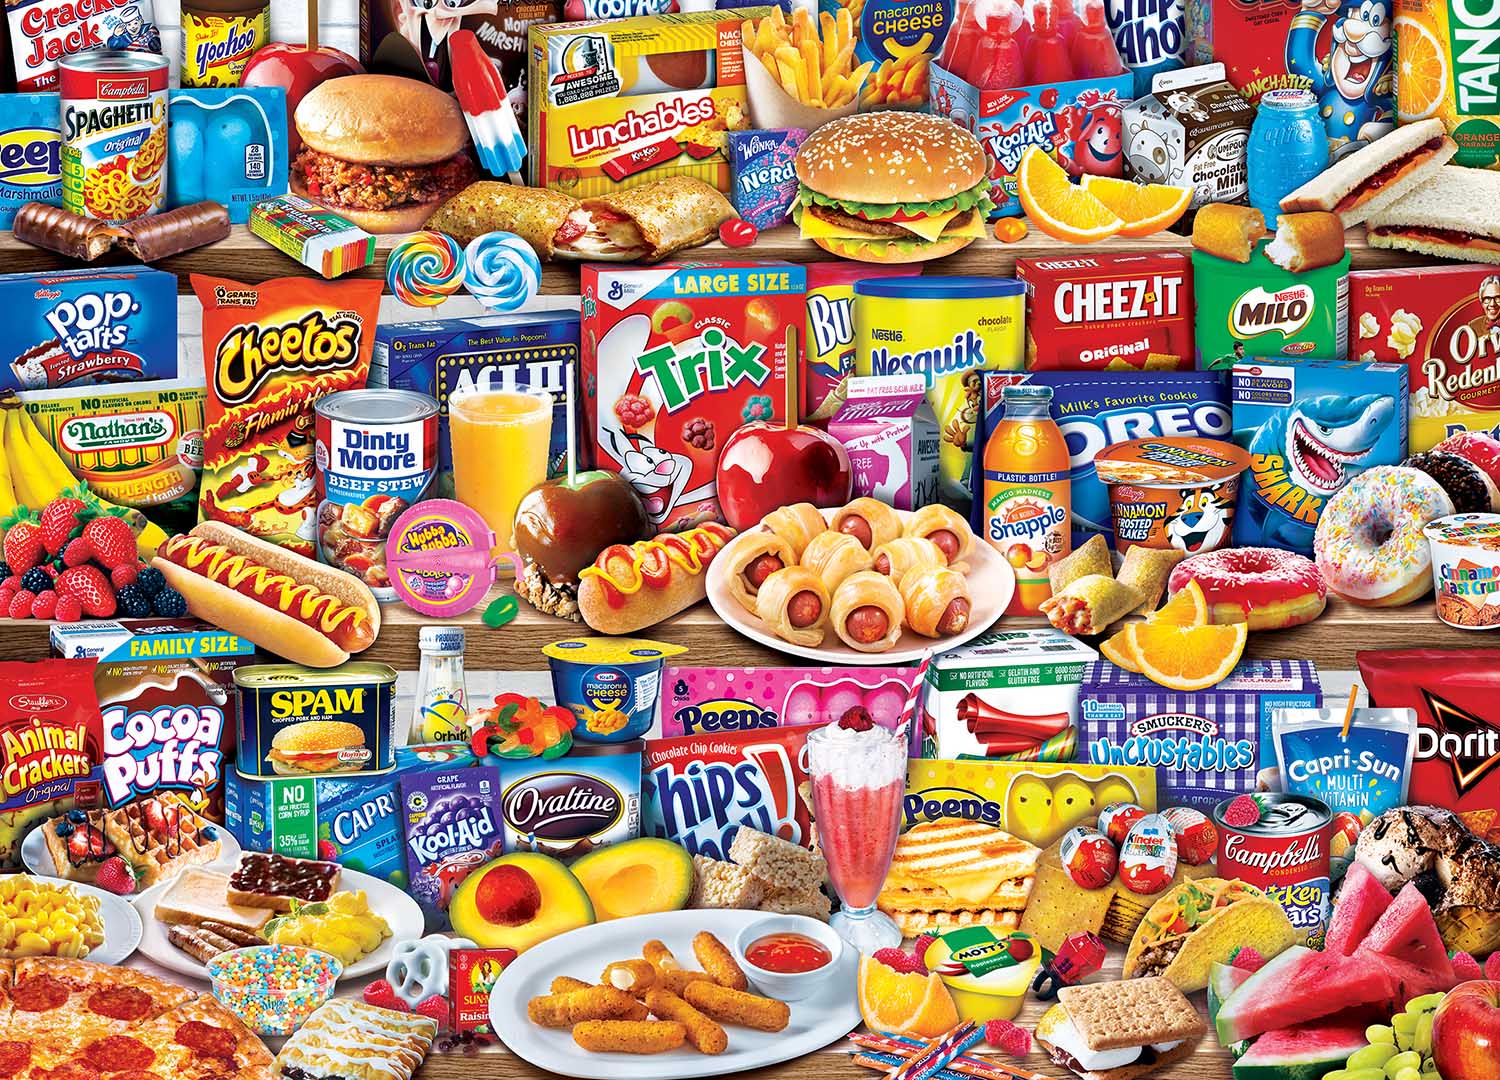 Kids Favorite Foods Food and Drink Jigsaw Puzzle